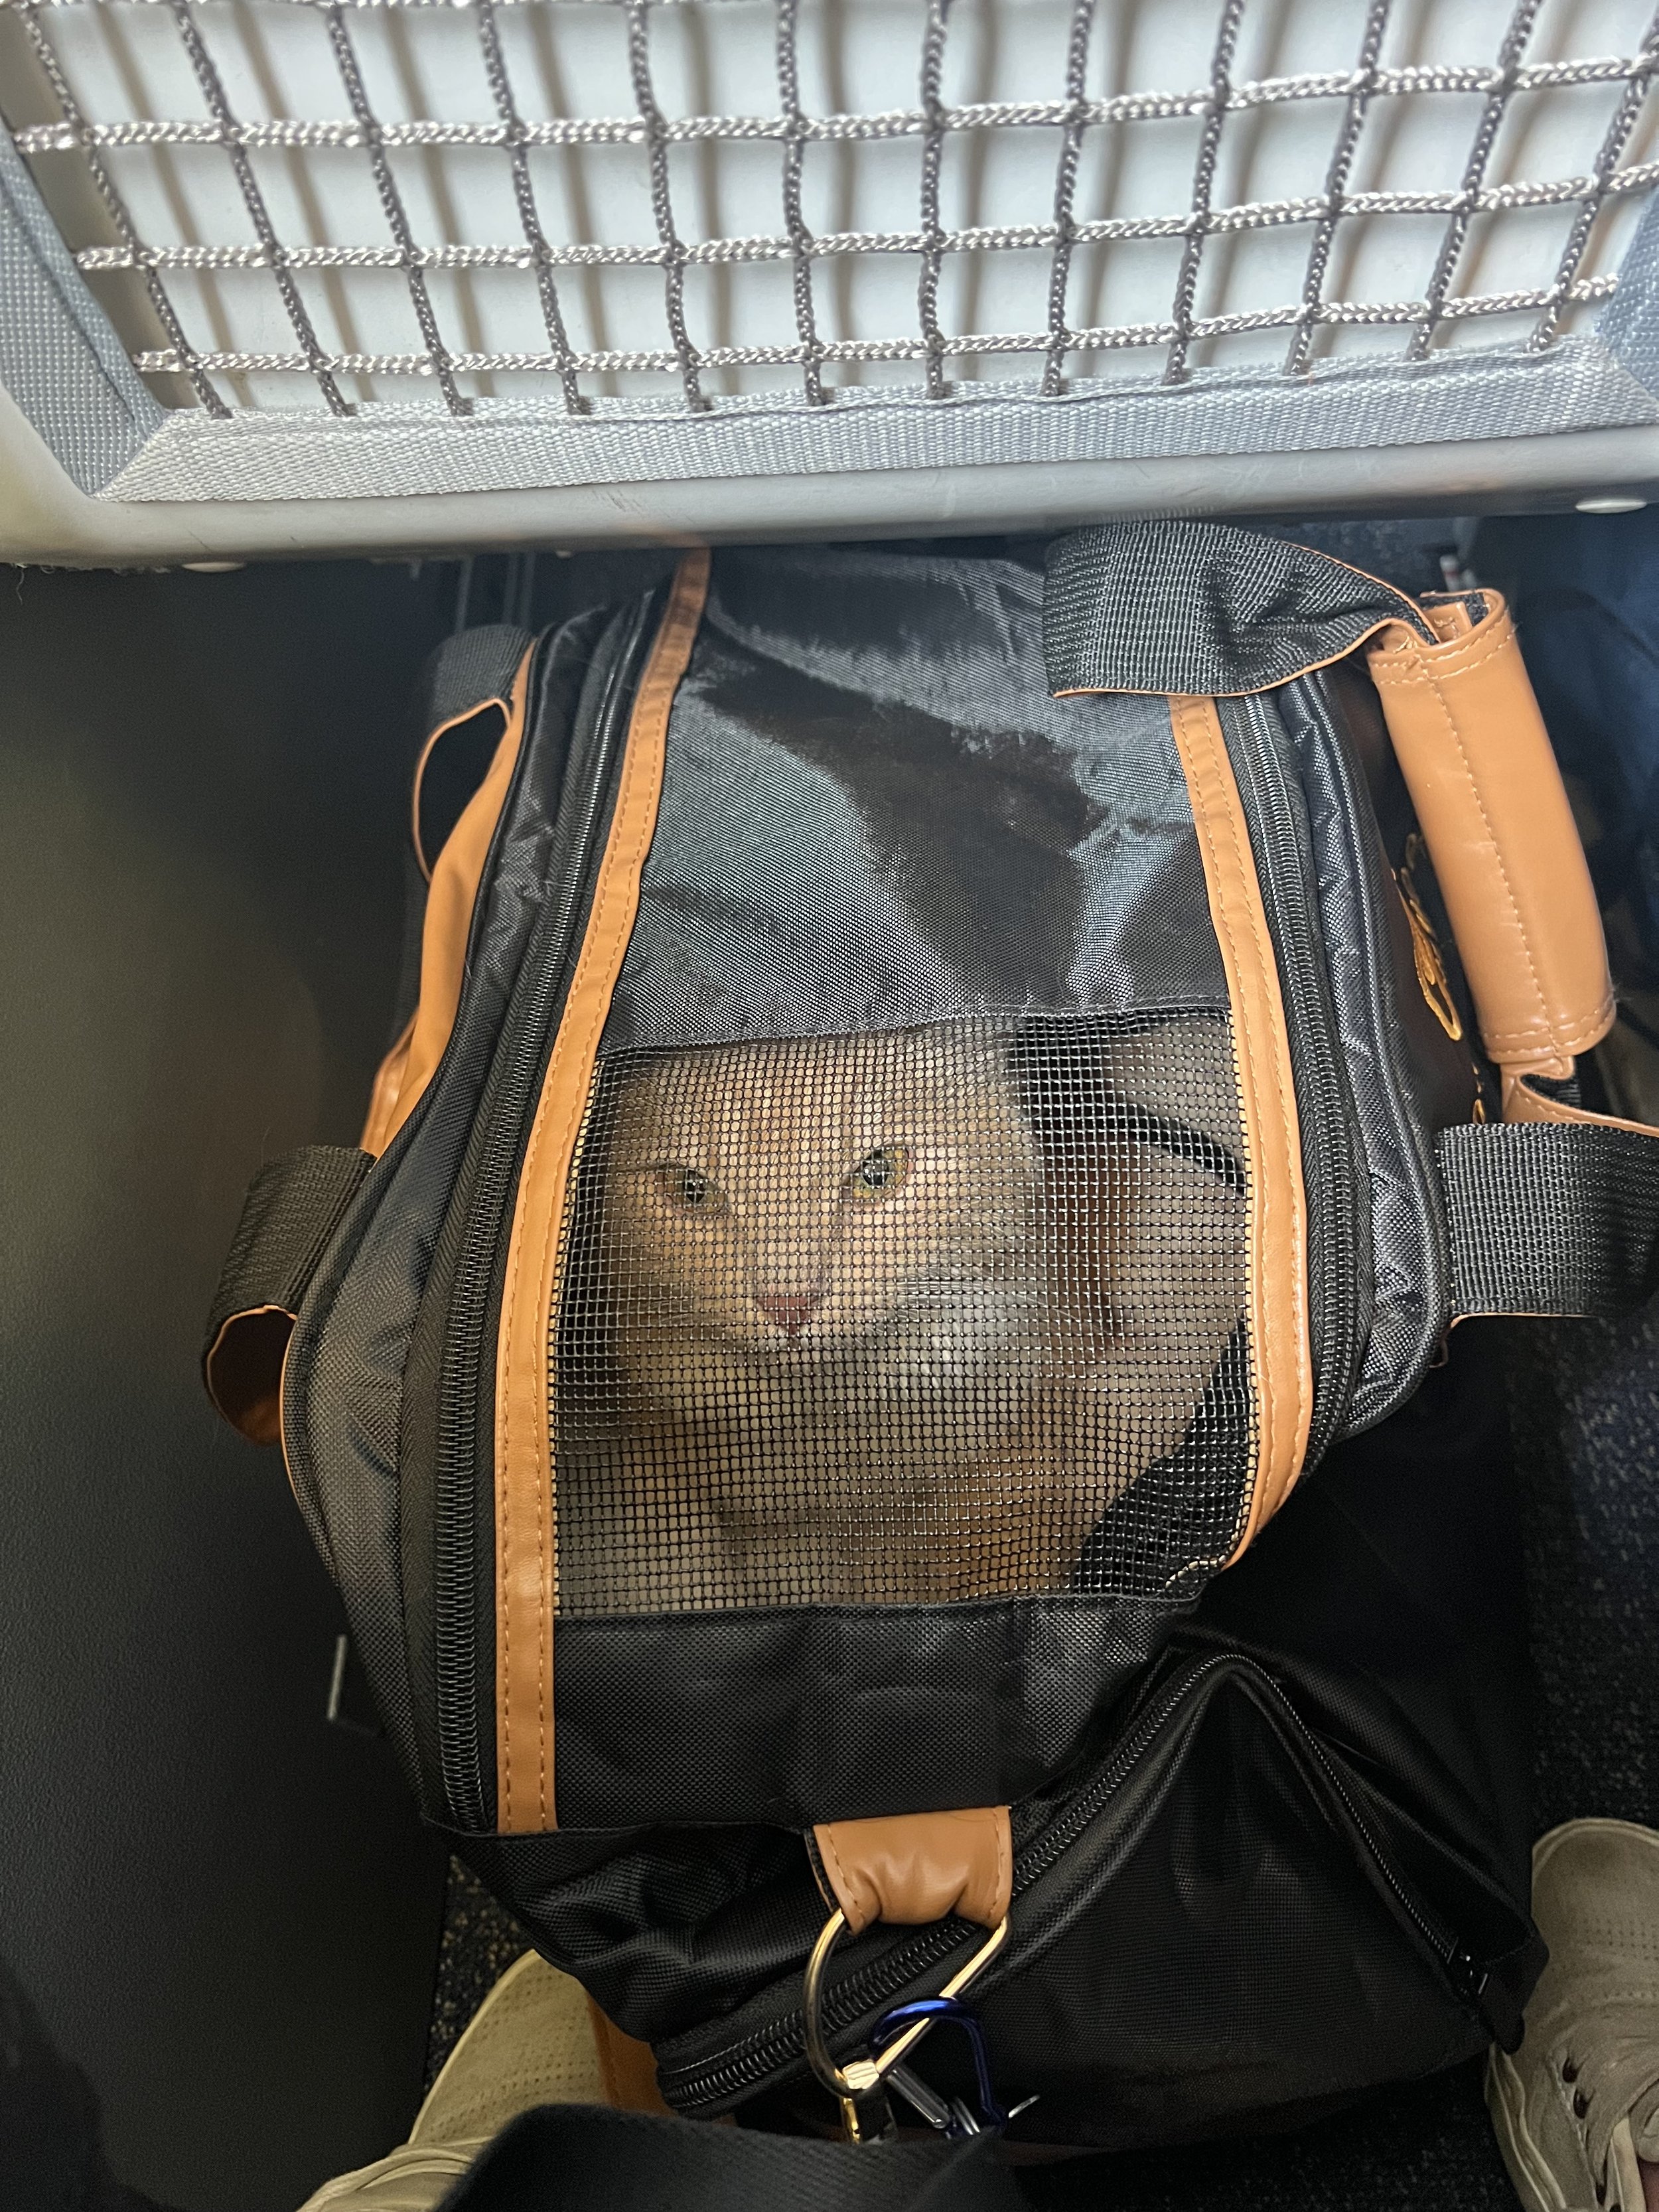 Adventure Cat on a Airplane